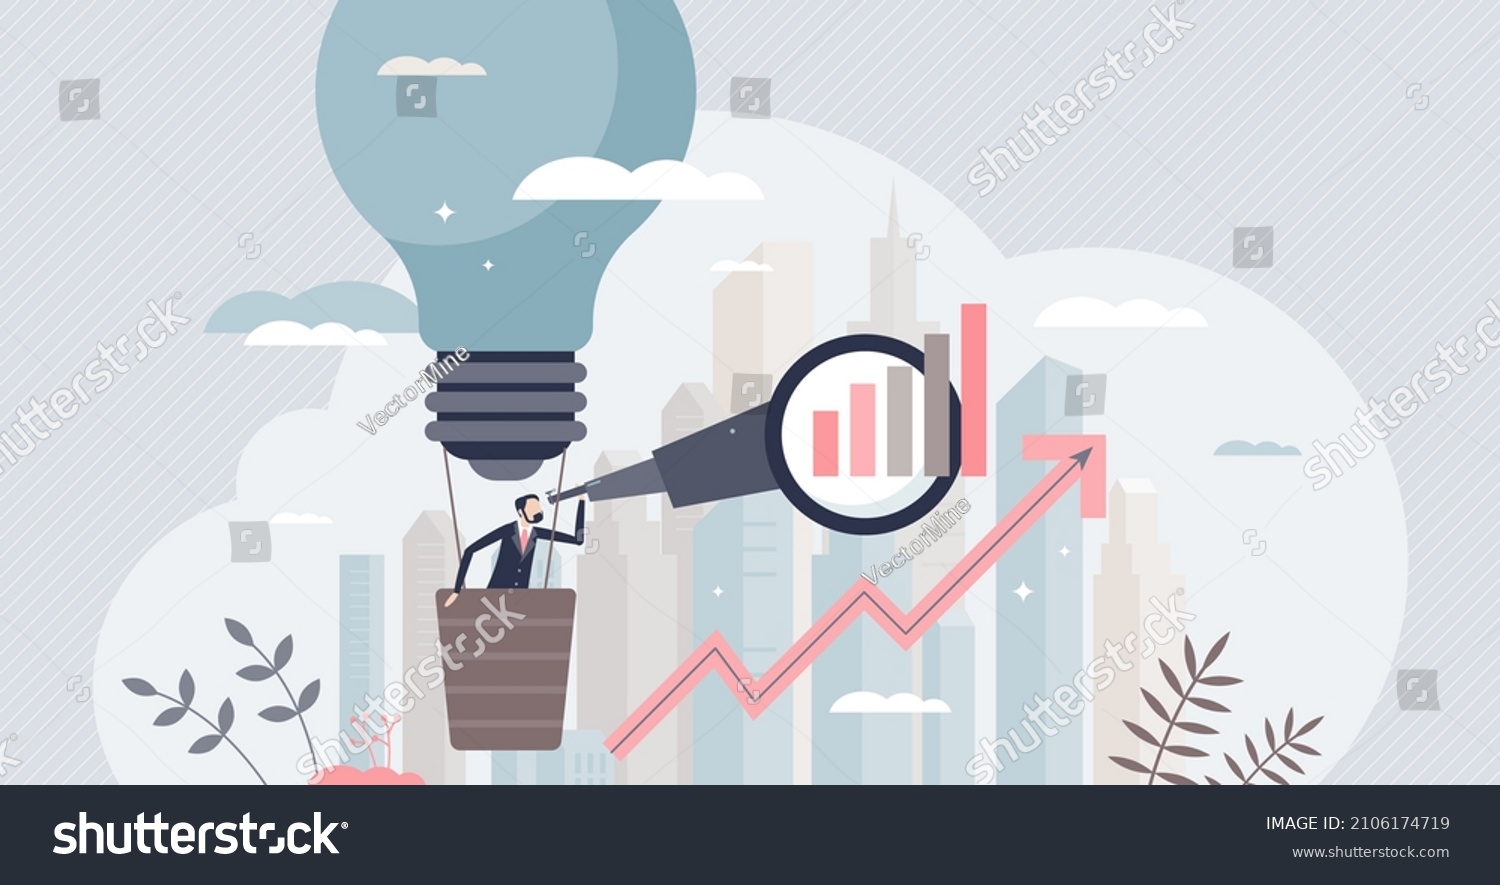 SVG of Business forecasting with startup idea future profit results prediction tiny person concept. Performance strategy and calculation for company growth plan vector illustration. Aim for income success. svg